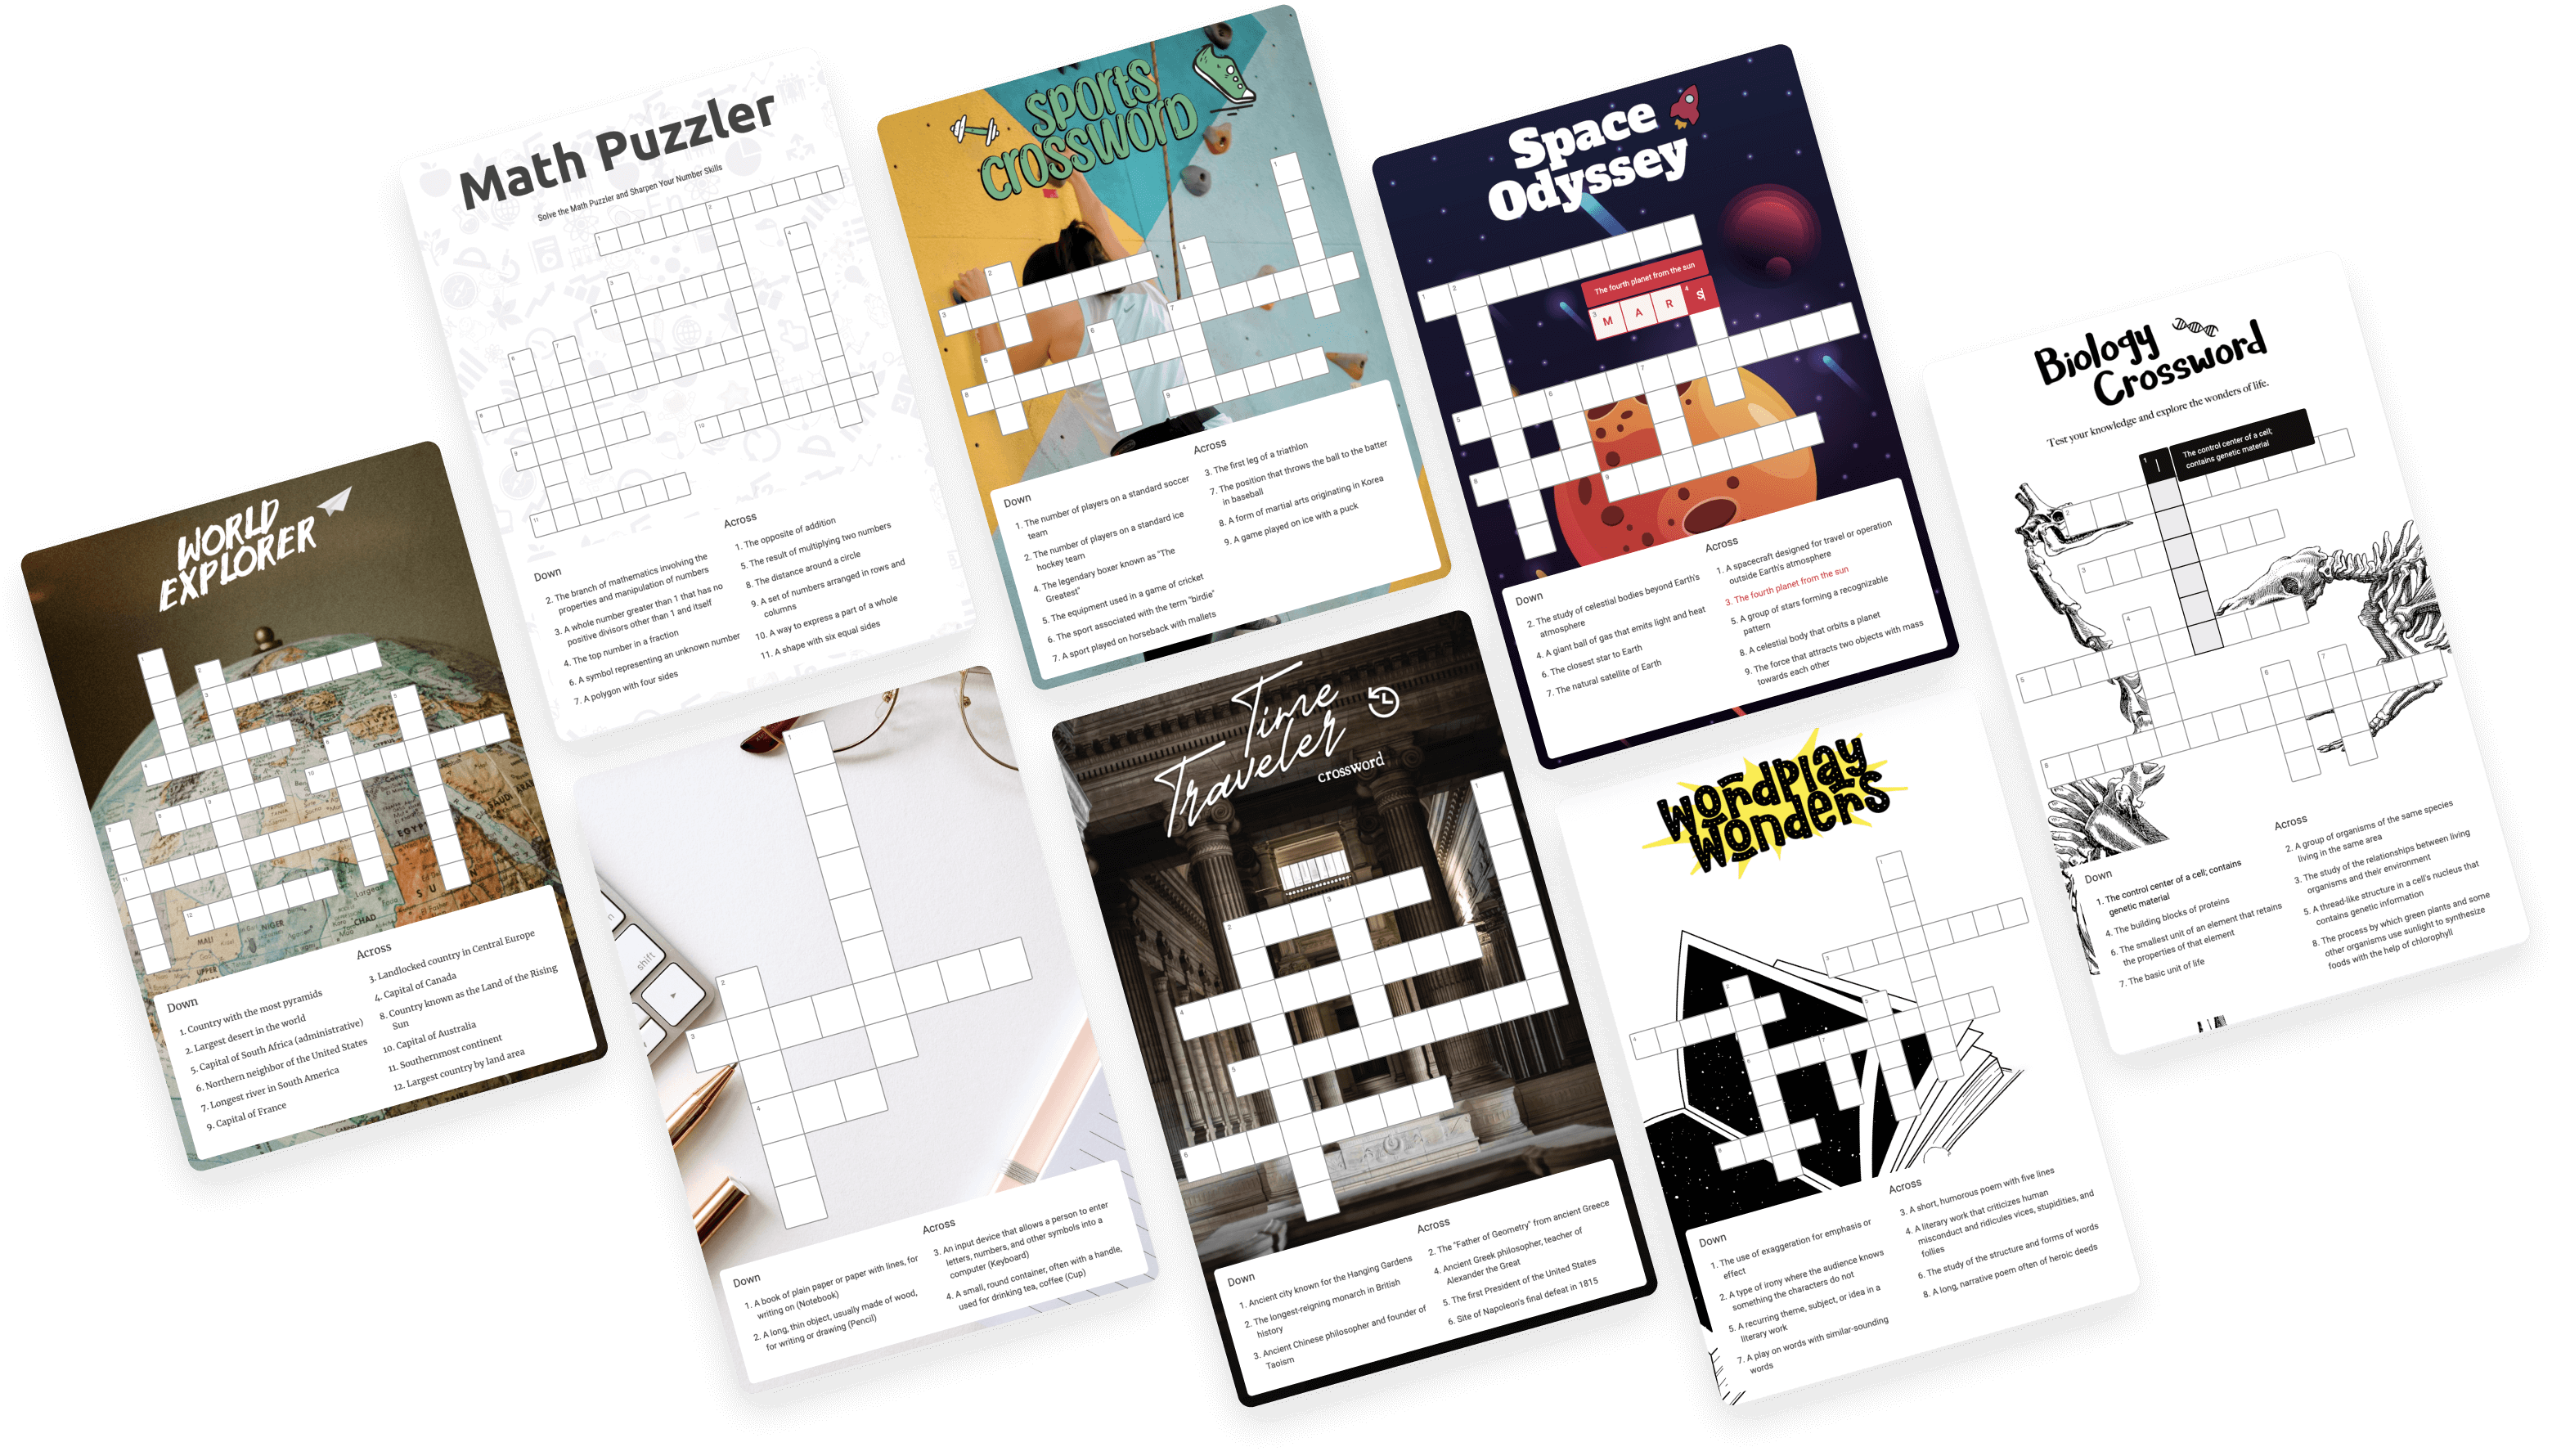 Posters with Interacty projects based on mechanics "Кроссворд"